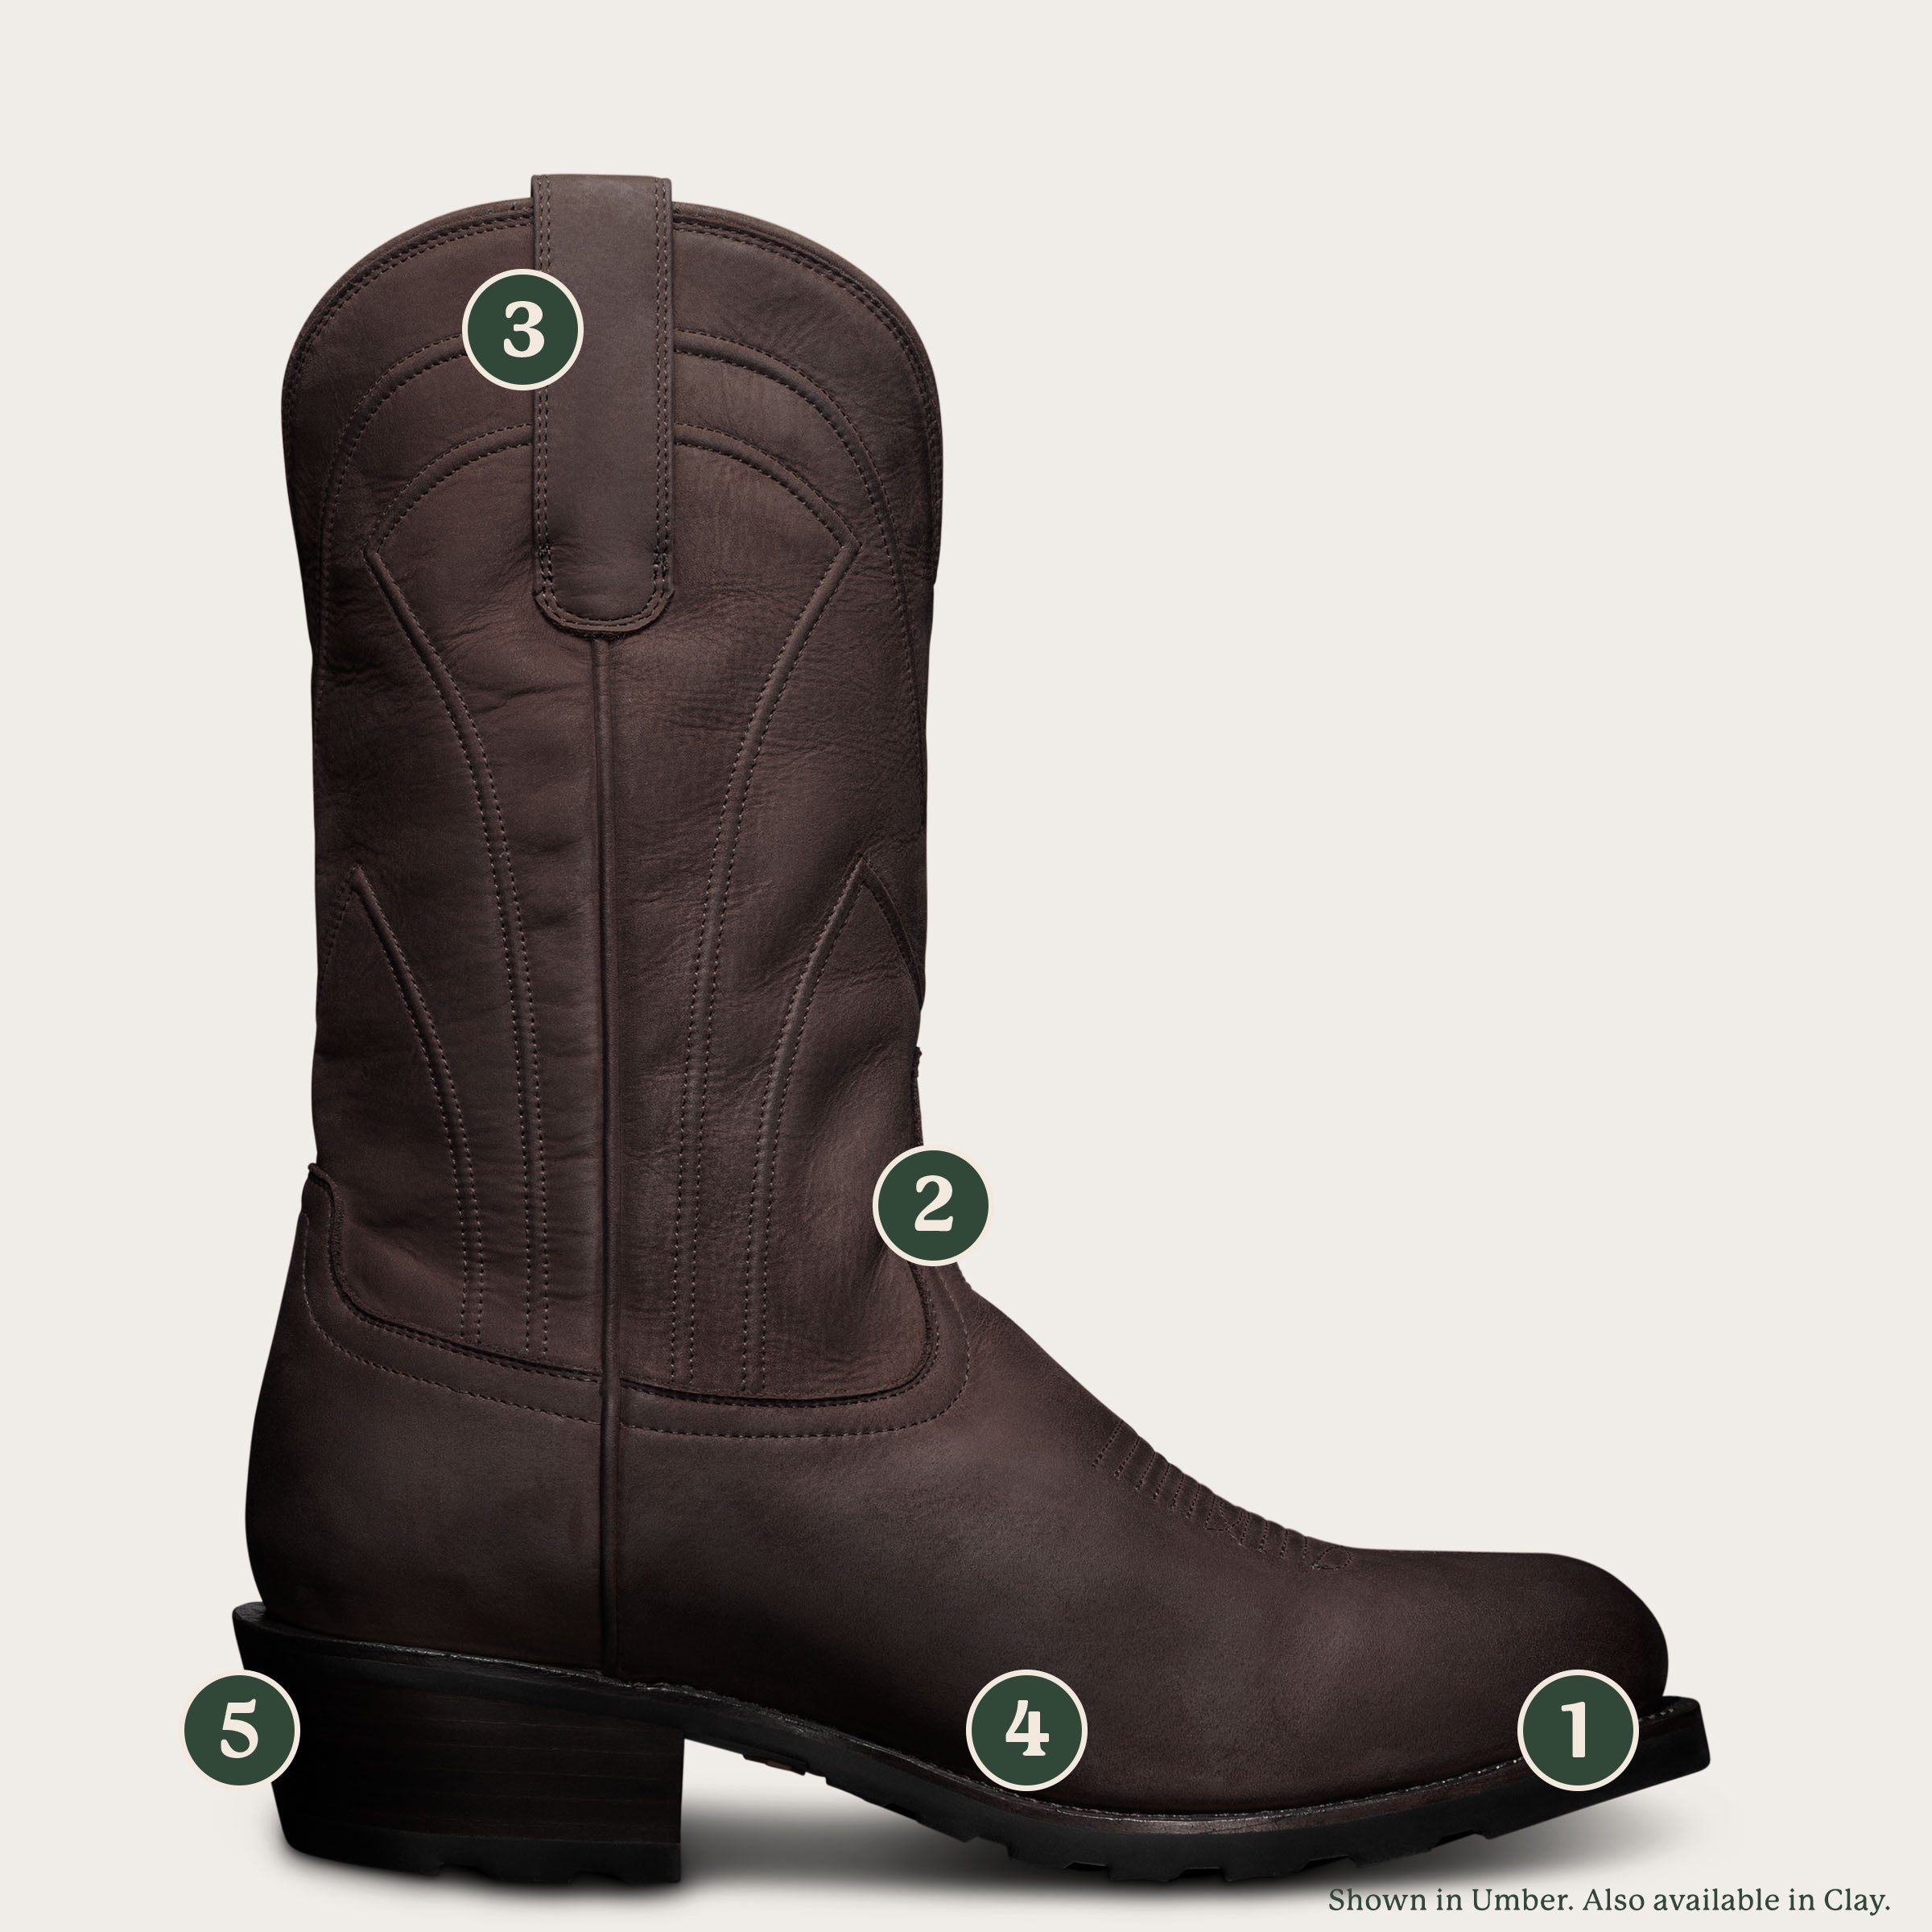 Ranch Wear - Ranch Boots, Jeans, and Apparel for Work | Tecovas